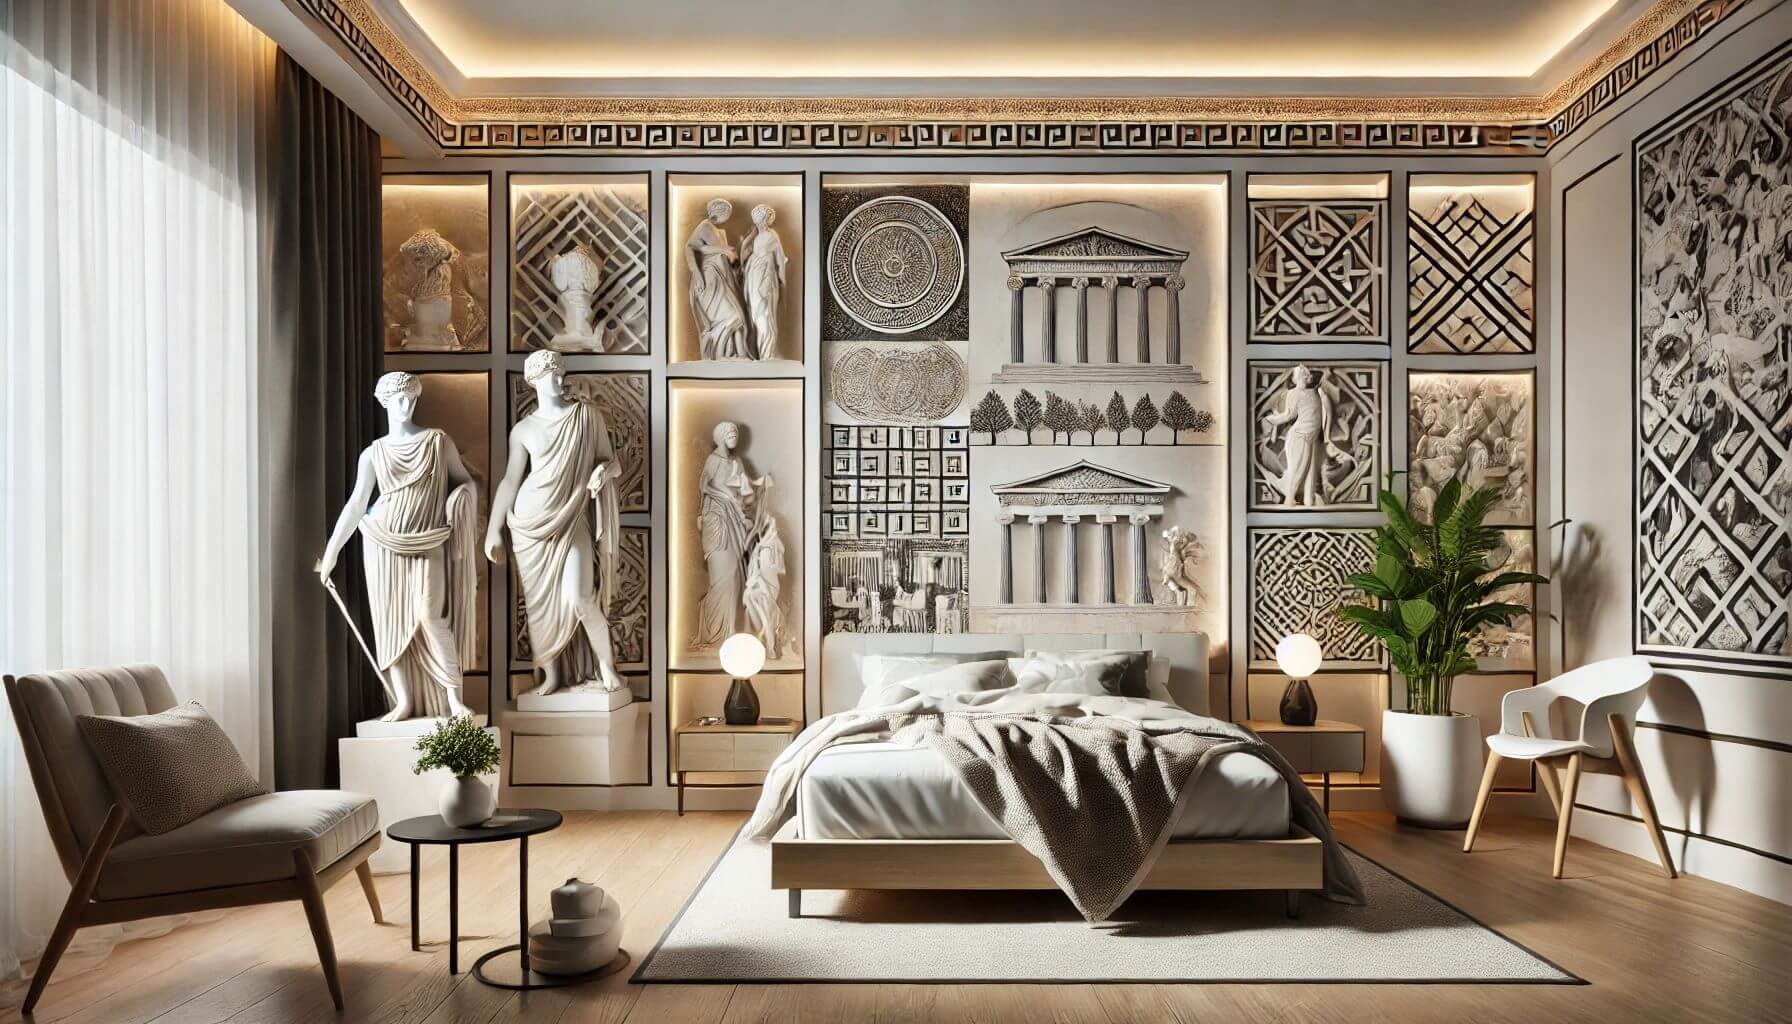 How to Mix Modern and Ancient Greek Elements in Your Bedroom